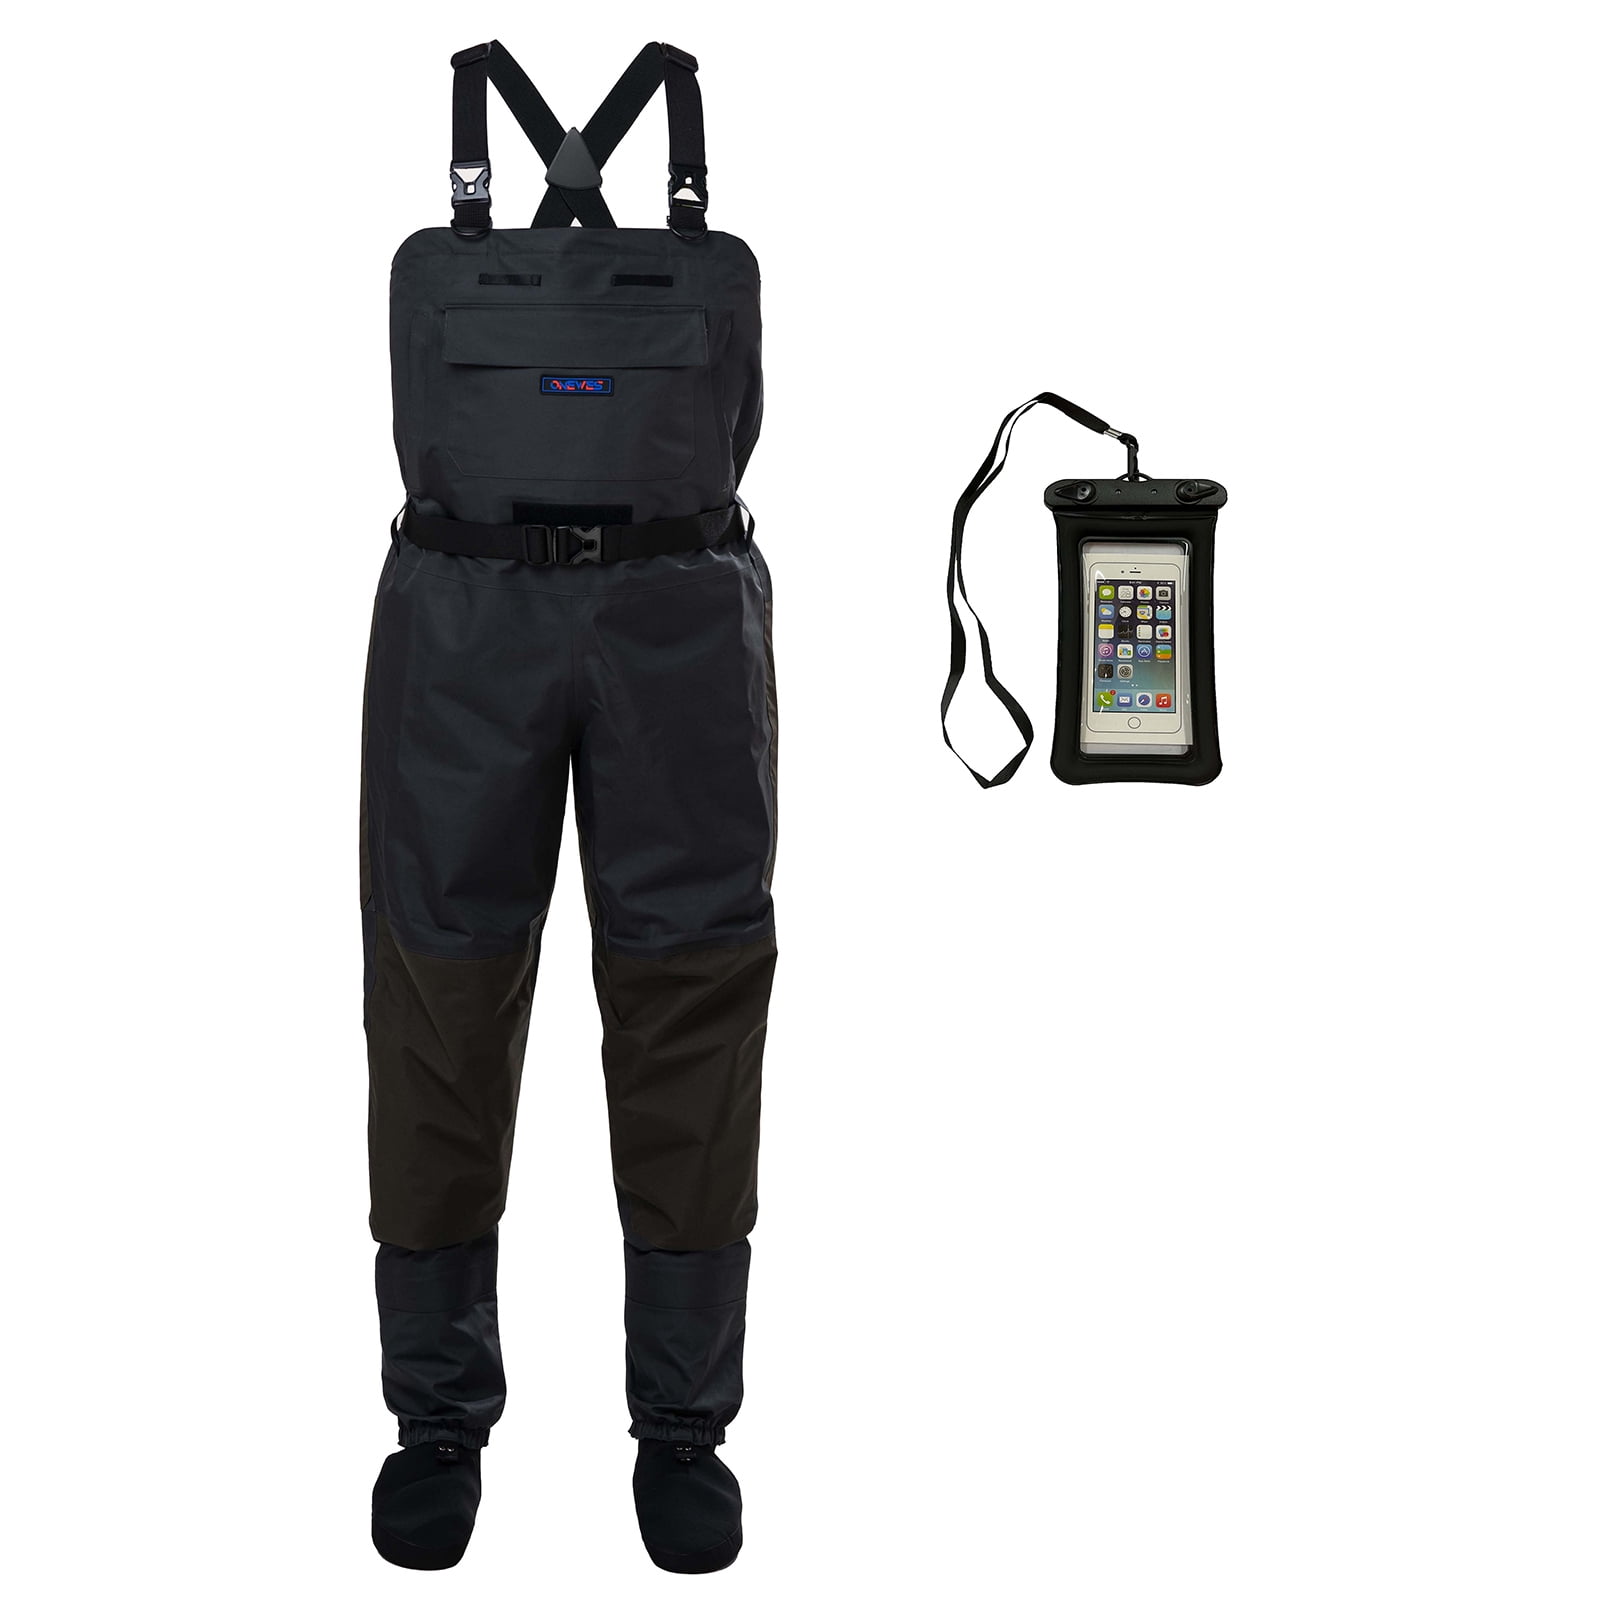 Onewes 4-Layer Waterproof Breathable Fly Fishing Waders with Neoprene Stockingfoot Mens Durable Chest Wader-3XL, Men's, Gray